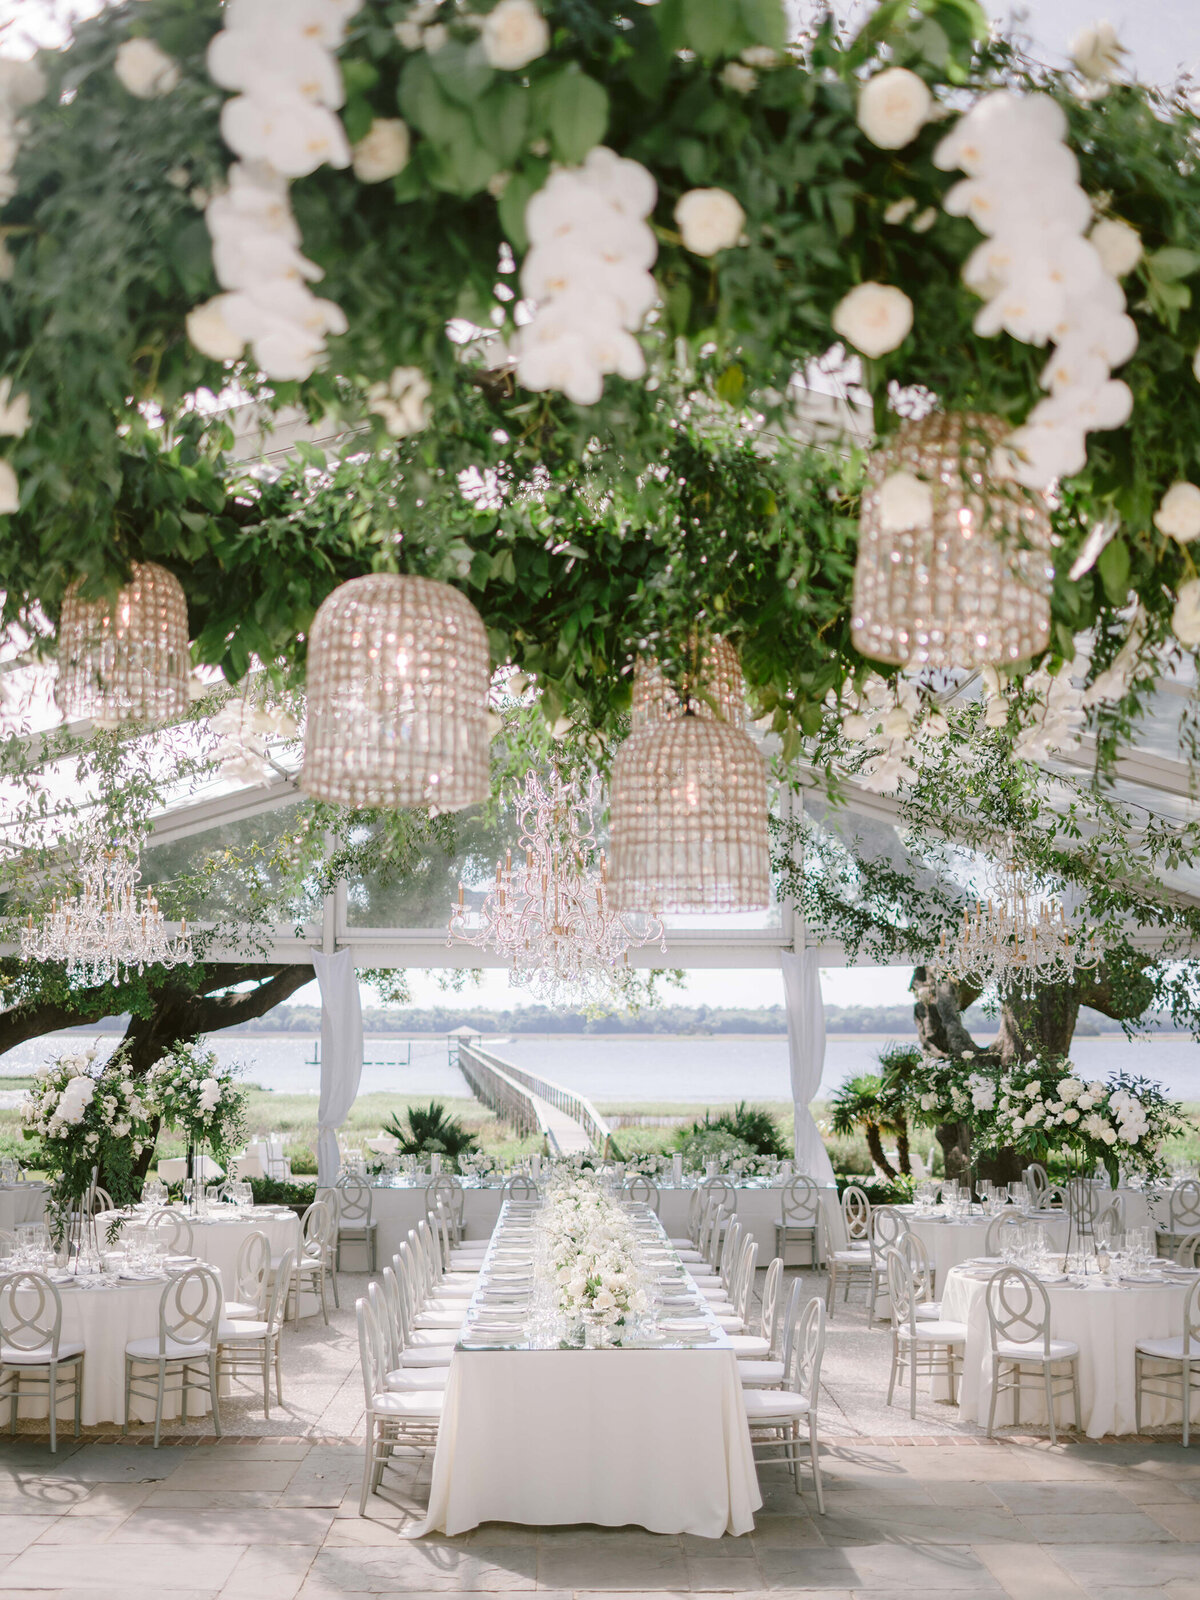 Rebecca + Joe | Tented Wedding at Lowndes Grove by Pure Luxe Bride: Charleston Wedding and Event Planners